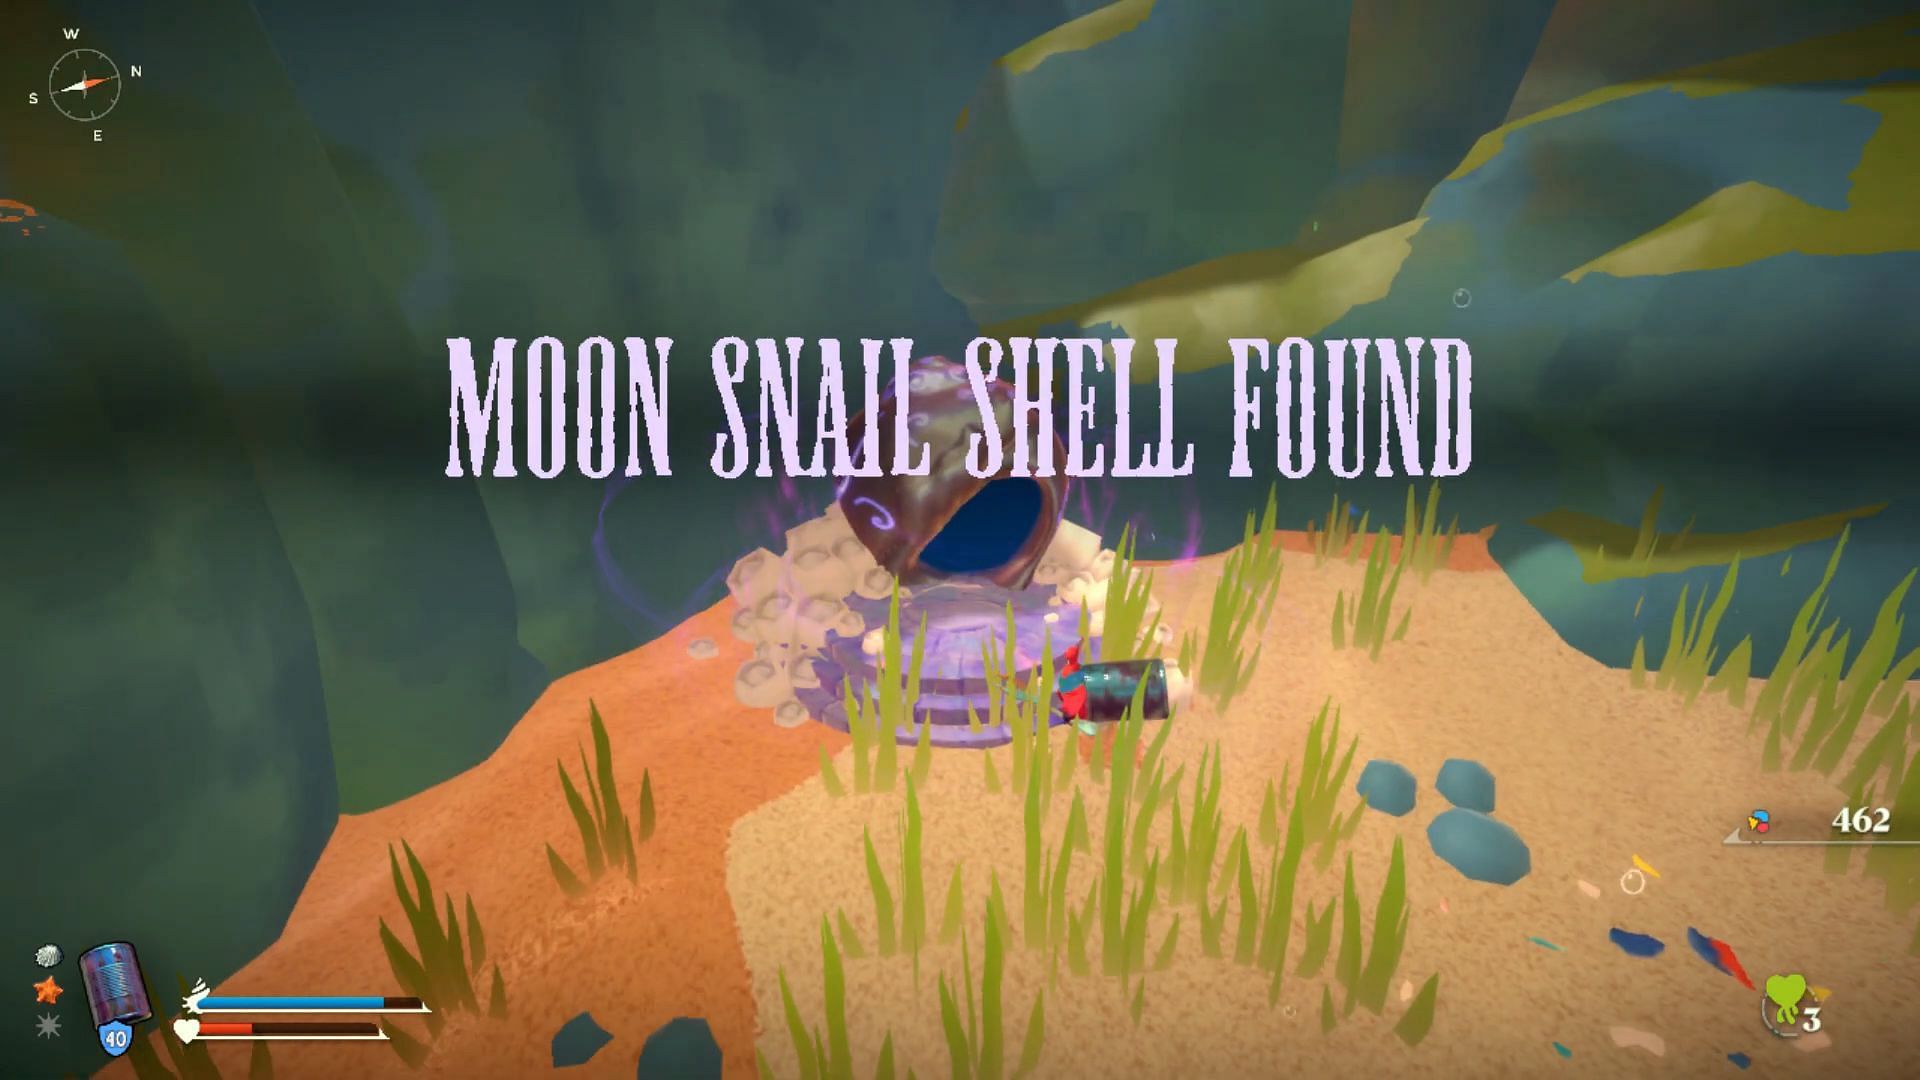 Moon Snail Shell as seen in the game. (Image via Aggro Crab || Karmakazi on YouTube)